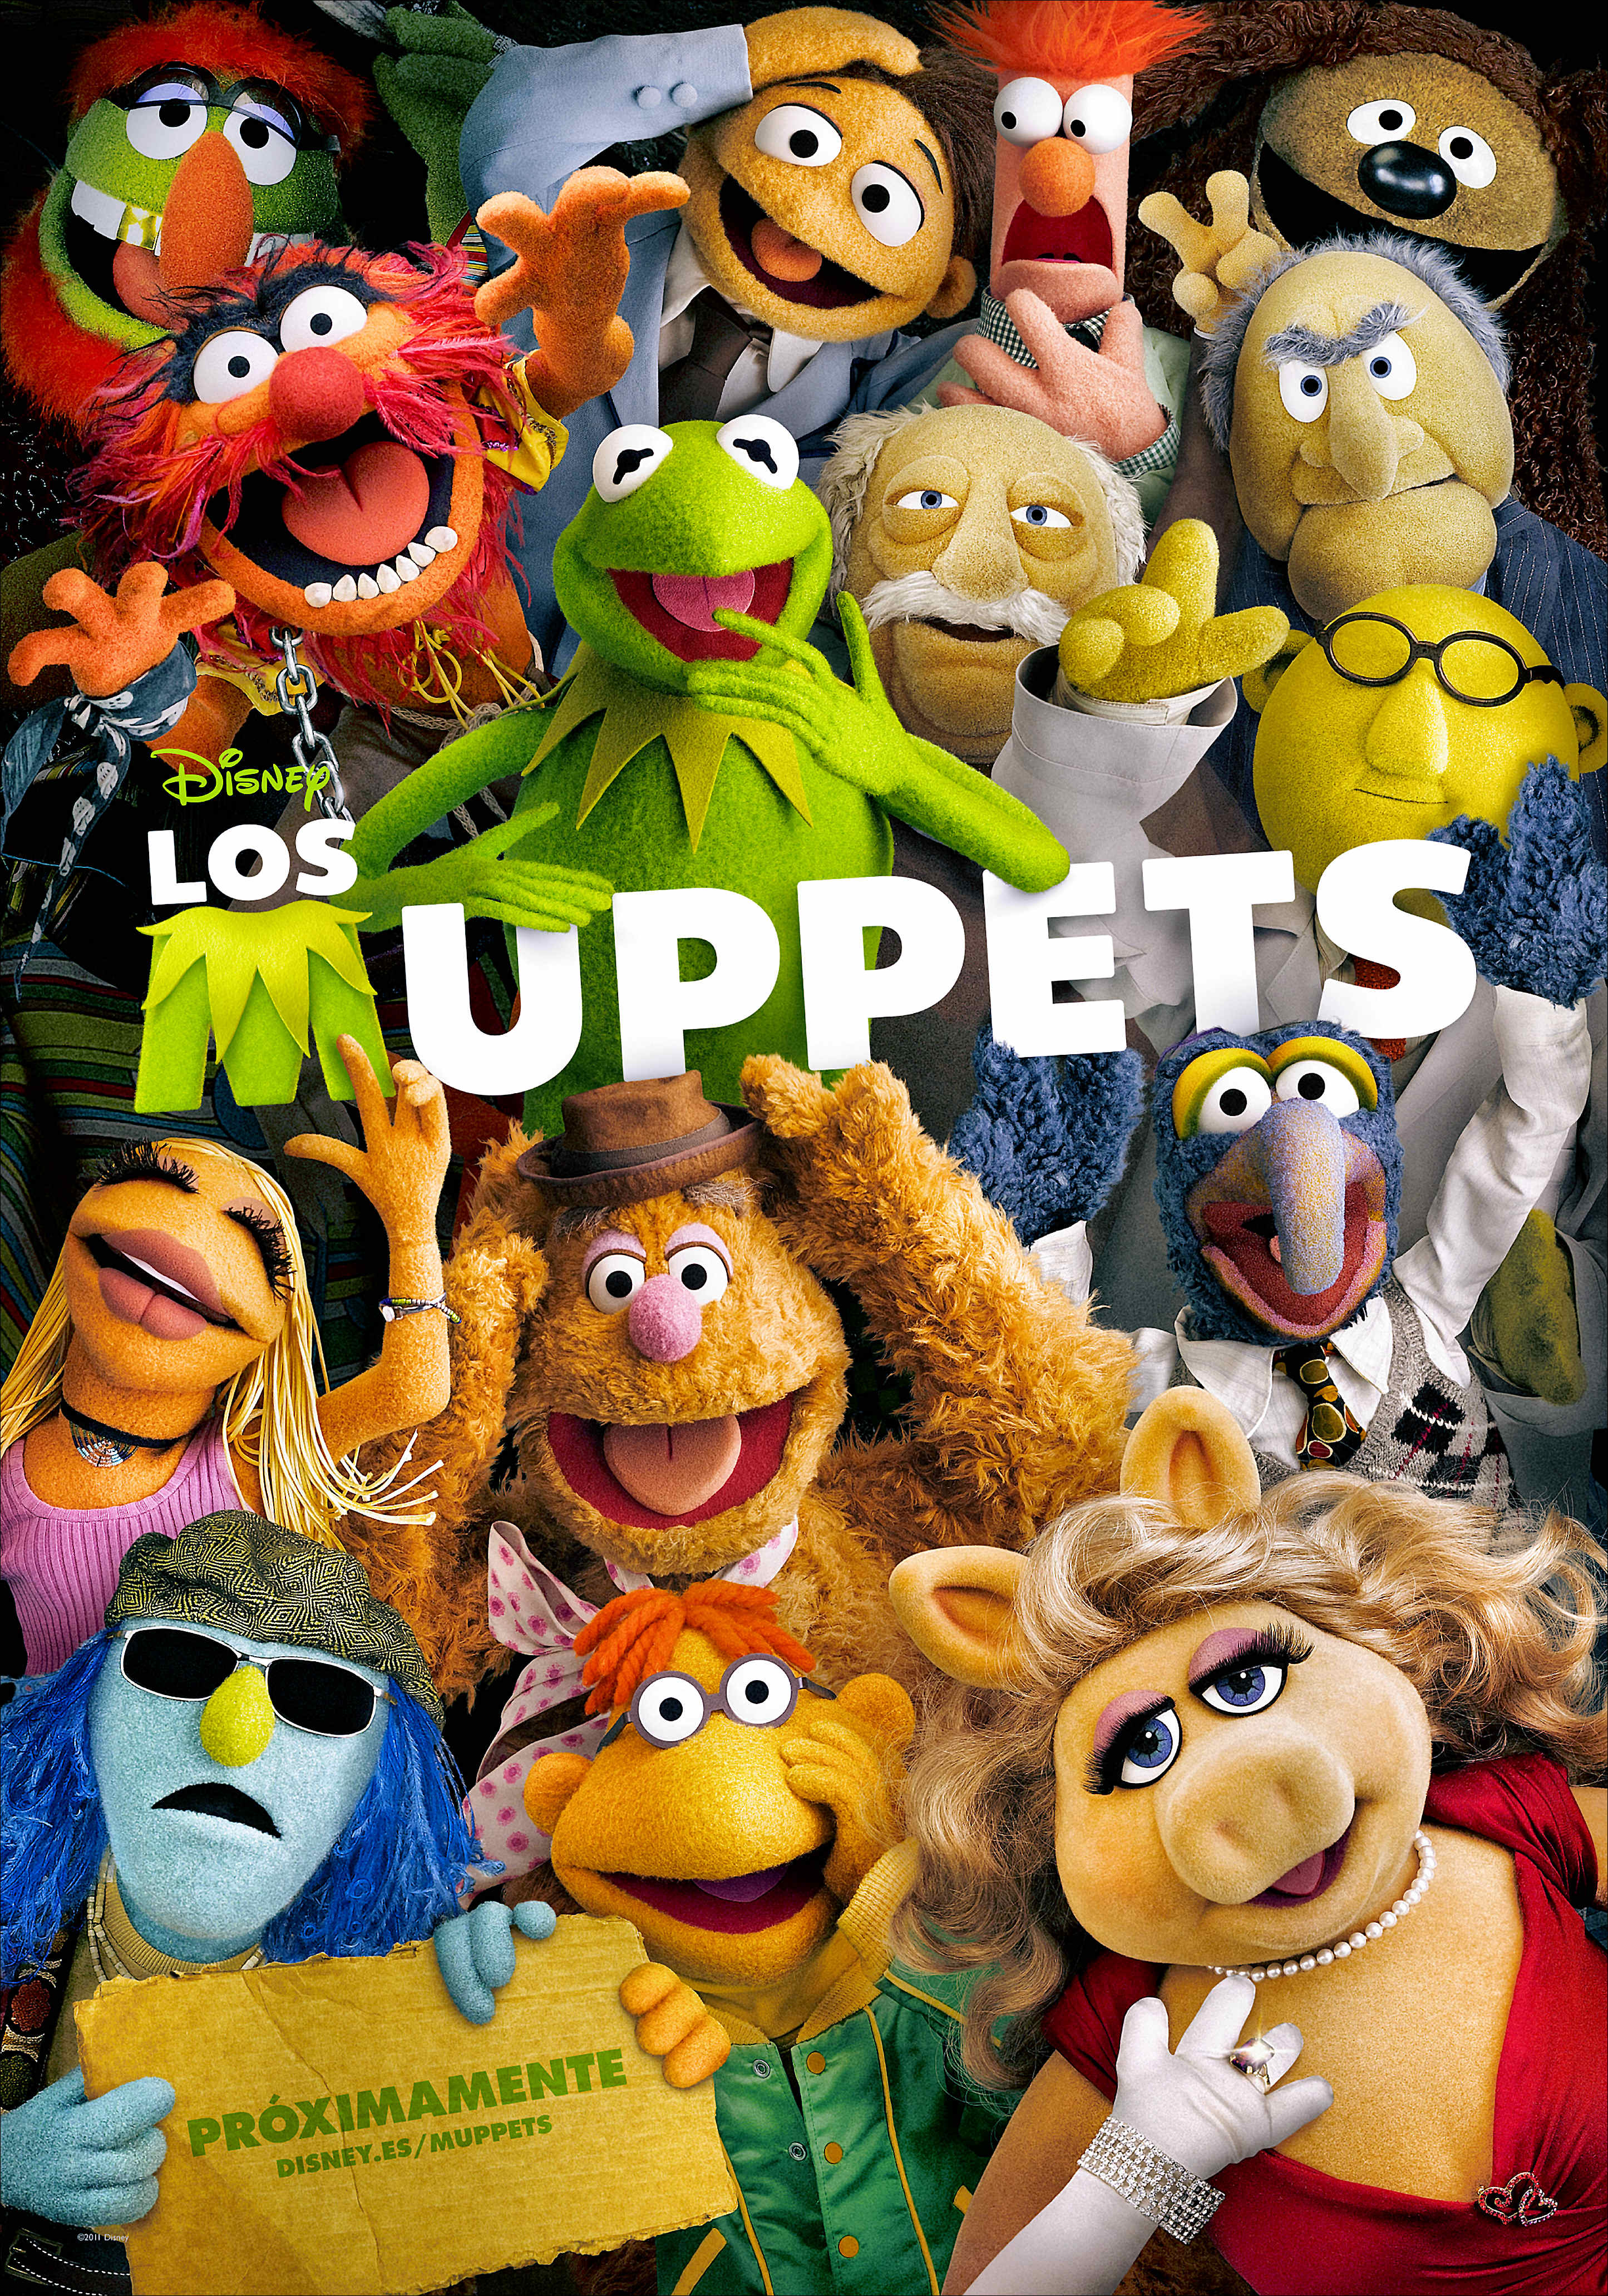 The Muppets #10